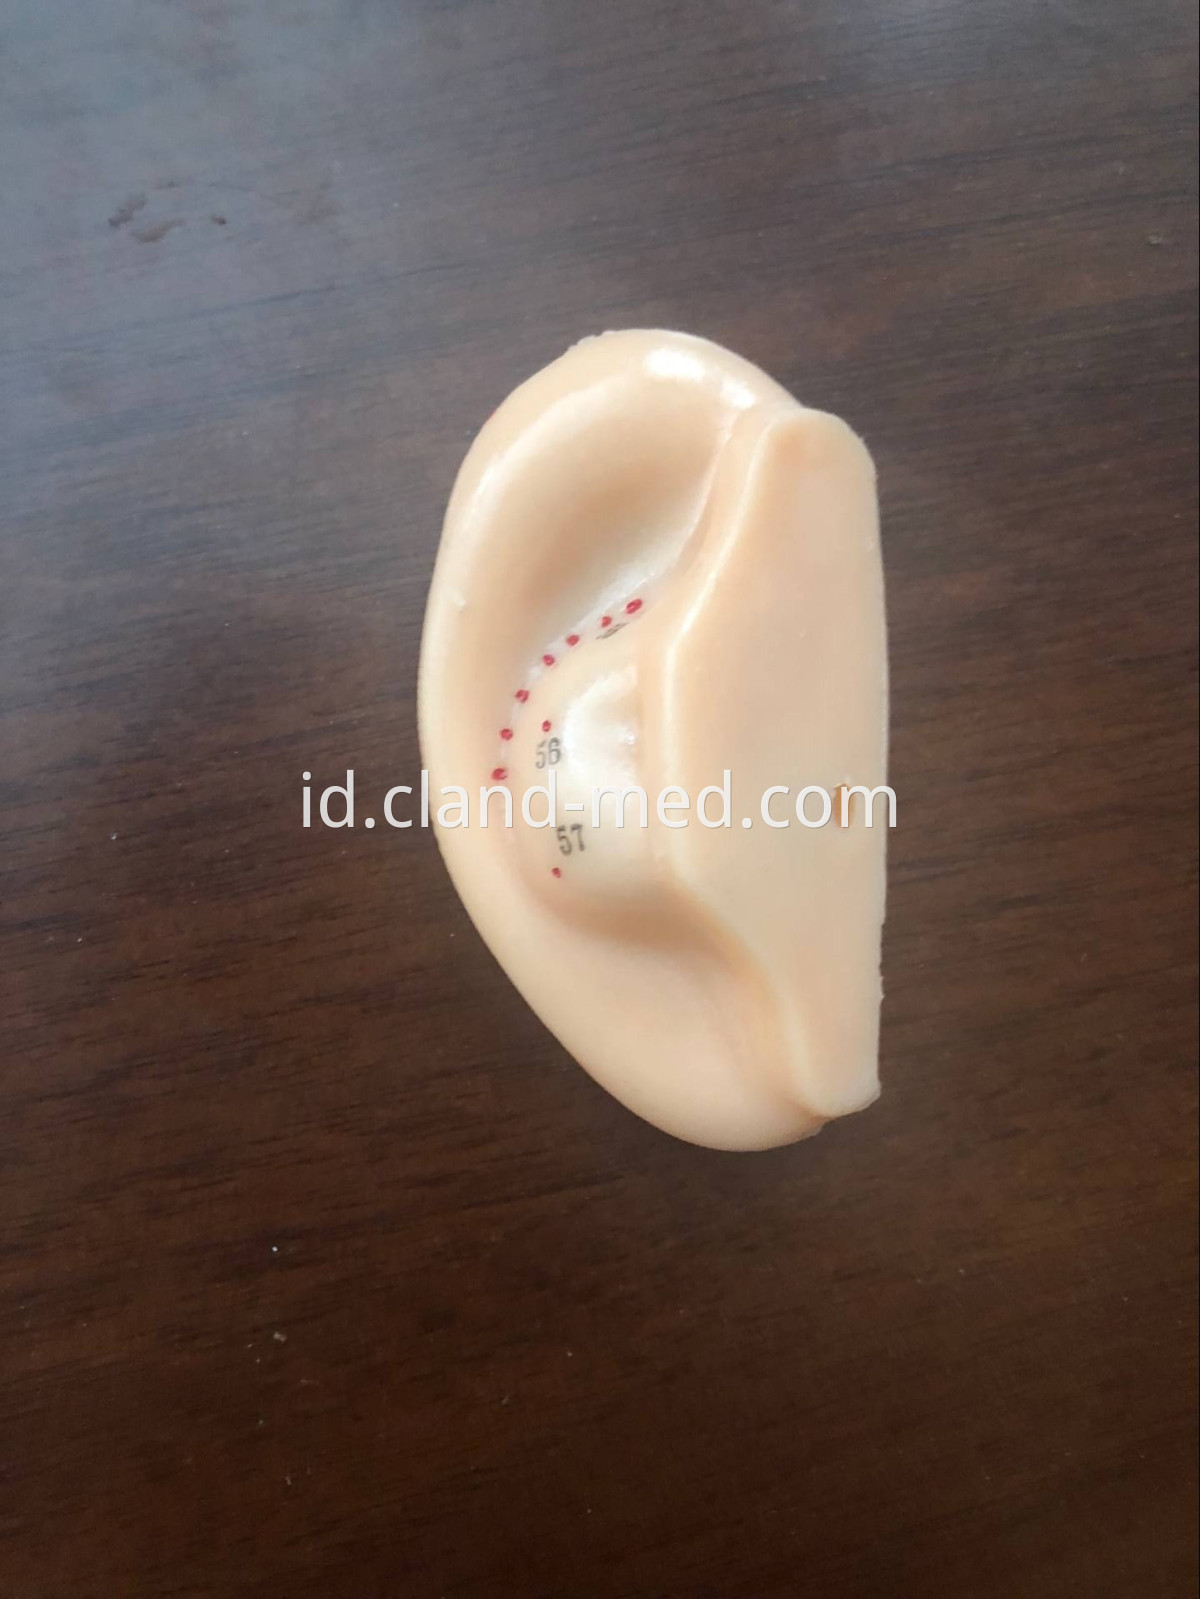 CL-MD0096 EAR ACUPUNCTURE MODEL 4